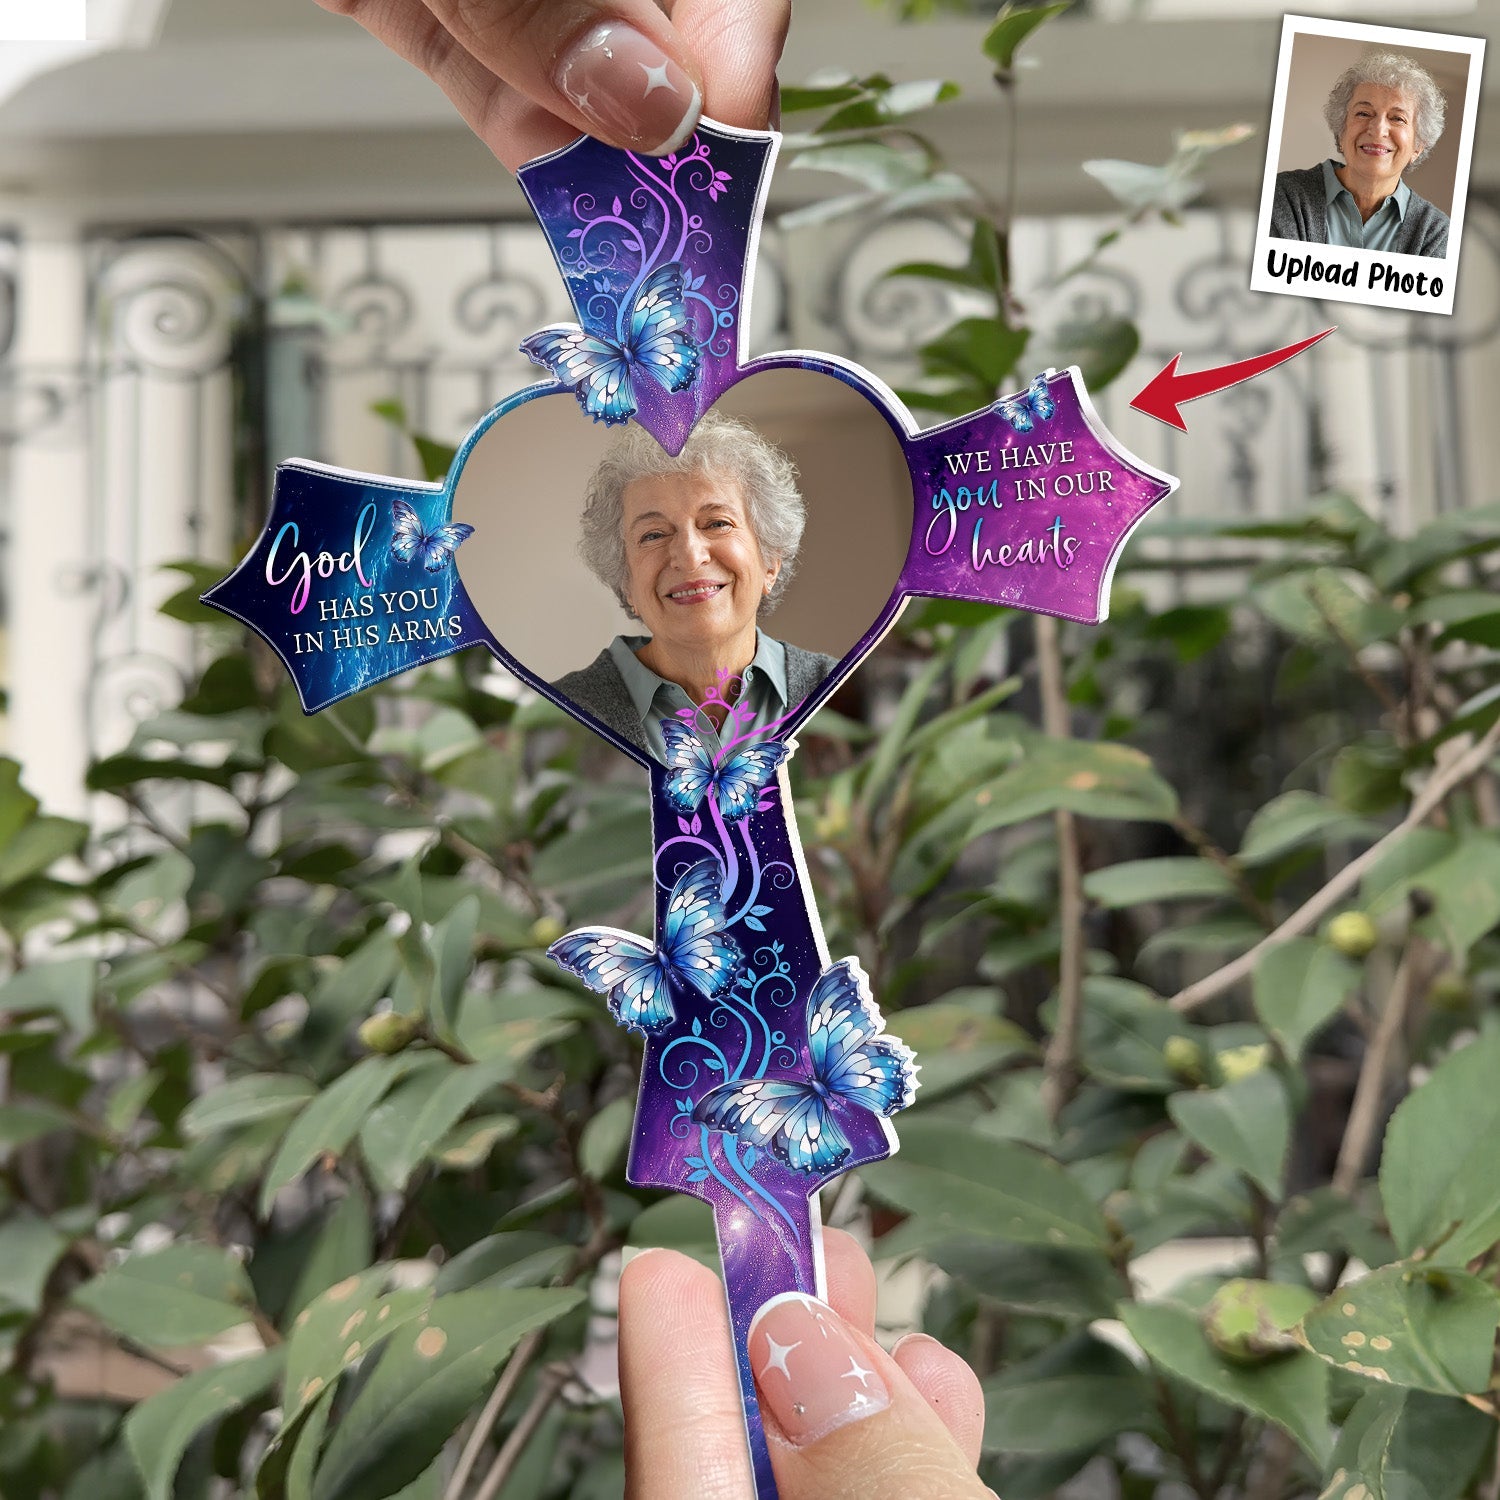 We Have You In Our Hearts - Personalized Photo Garden Stake